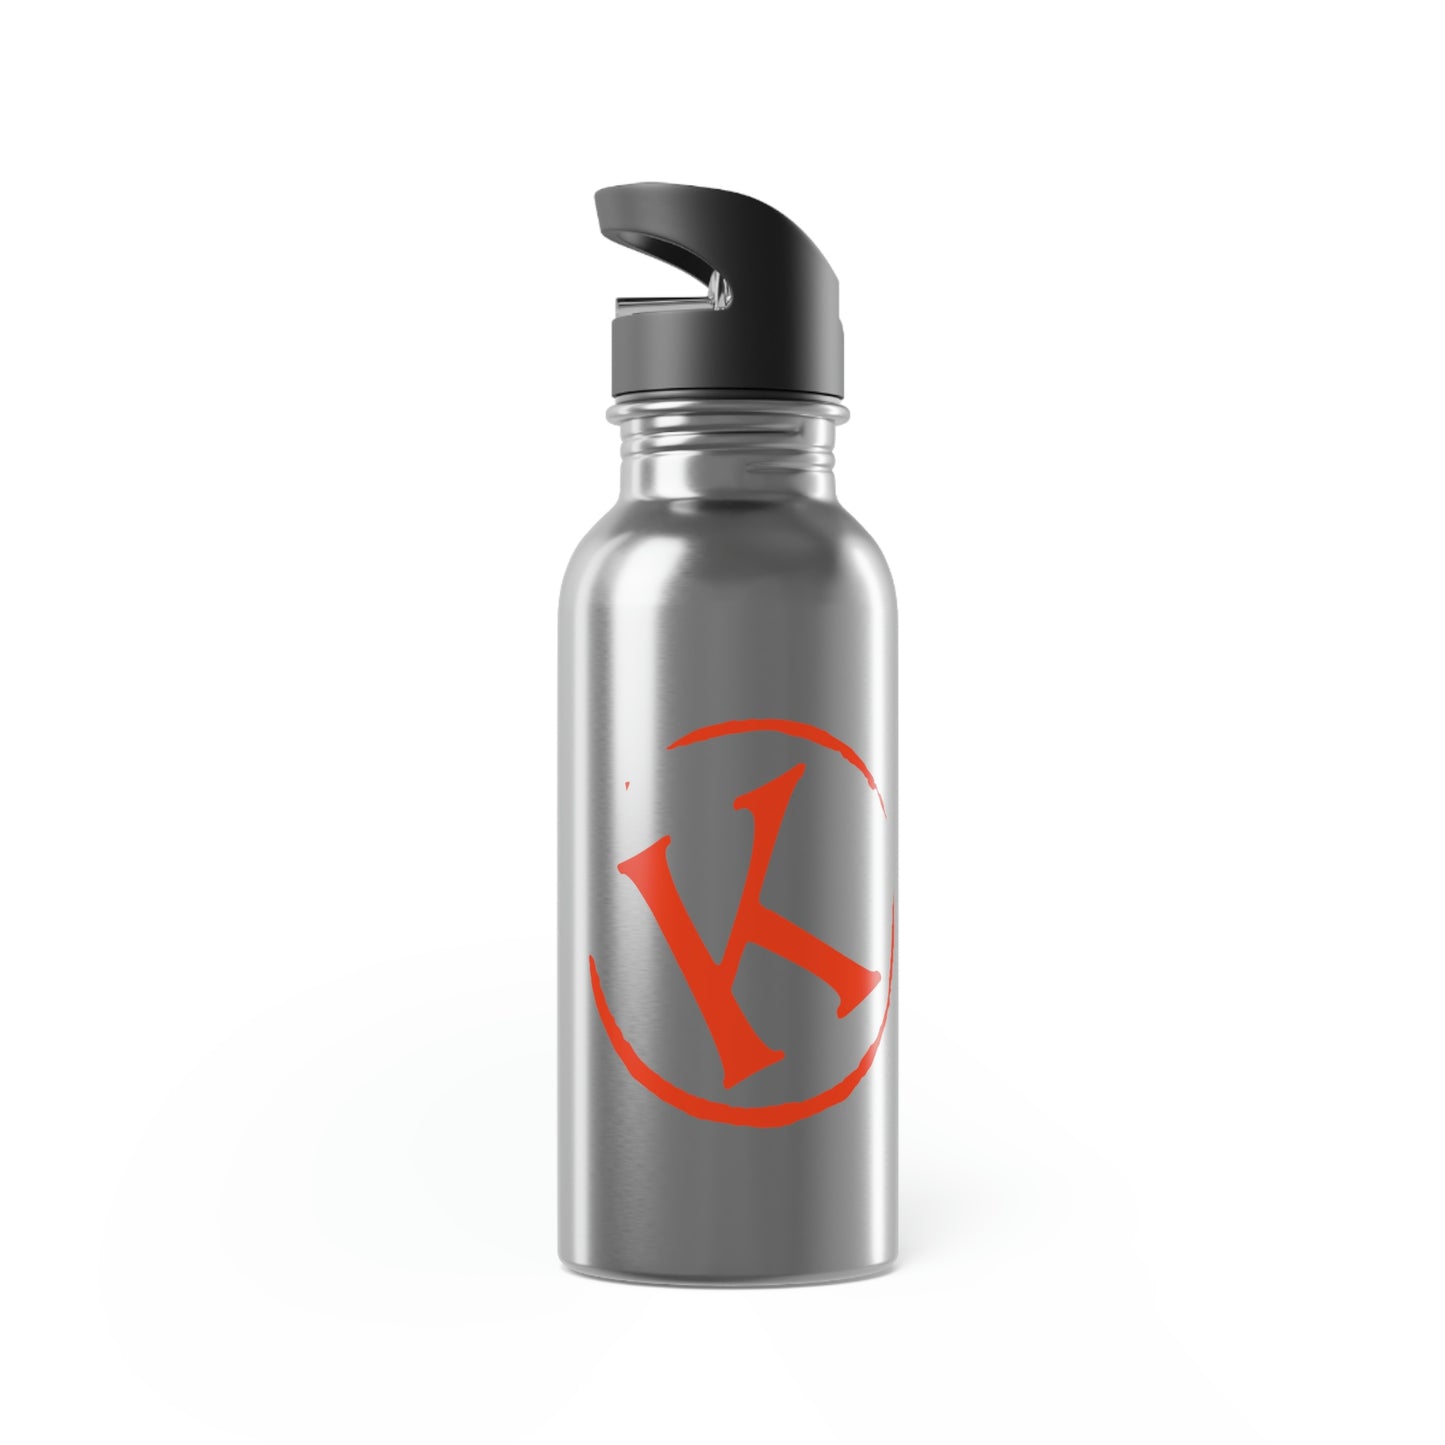 Branded K Stainless Steel Water Bottle With Straw, 20oz Oval logo #P15-03E